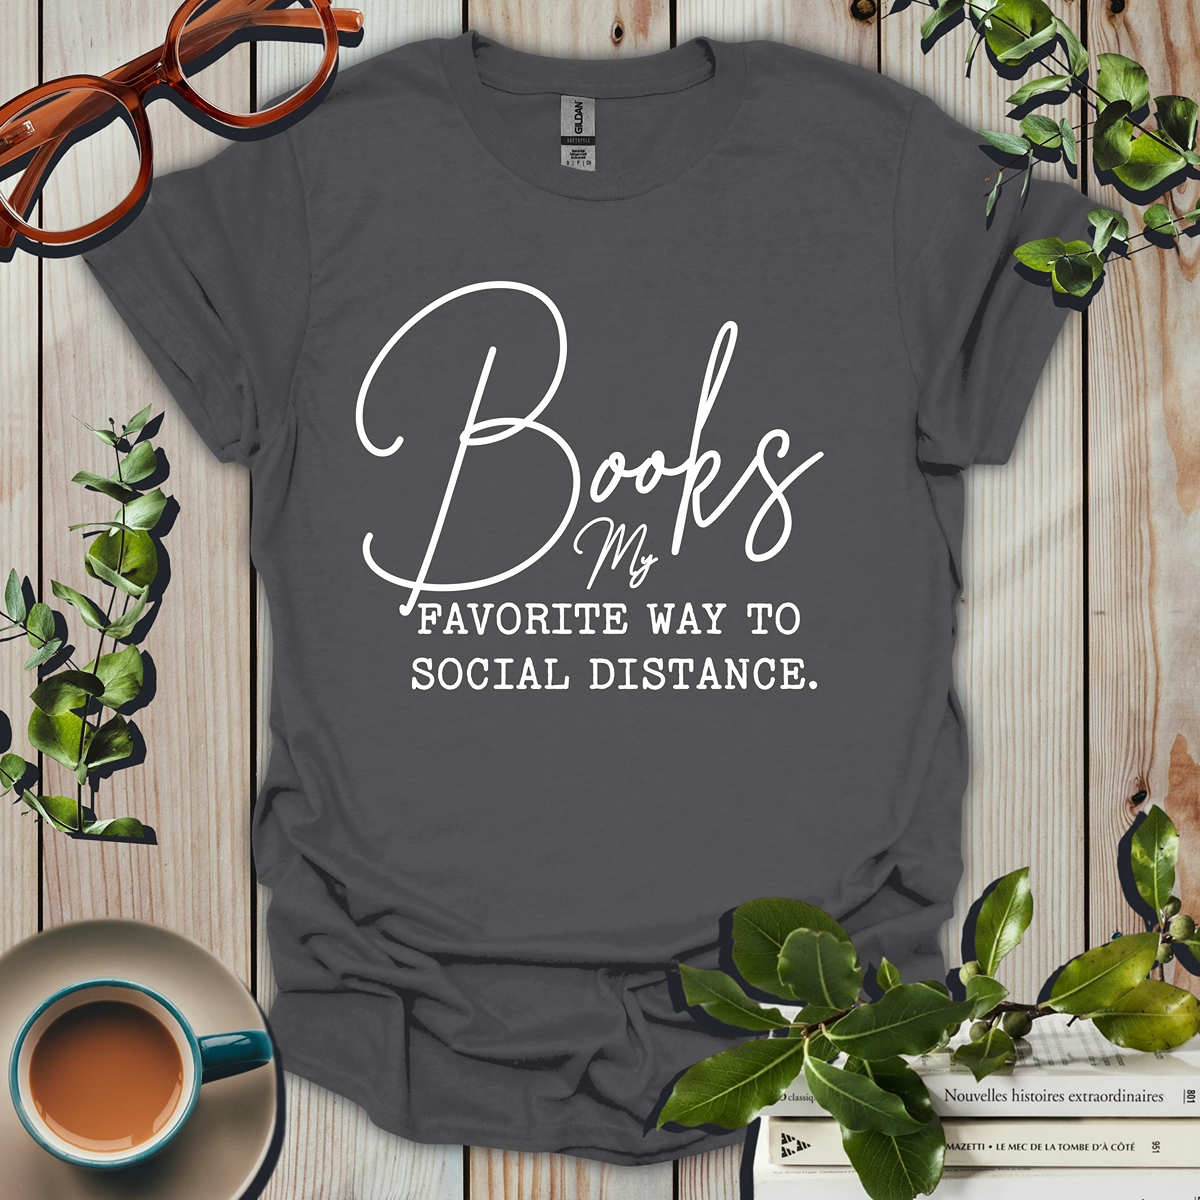 Books My Favorite Way To Social Distance T-Shirt